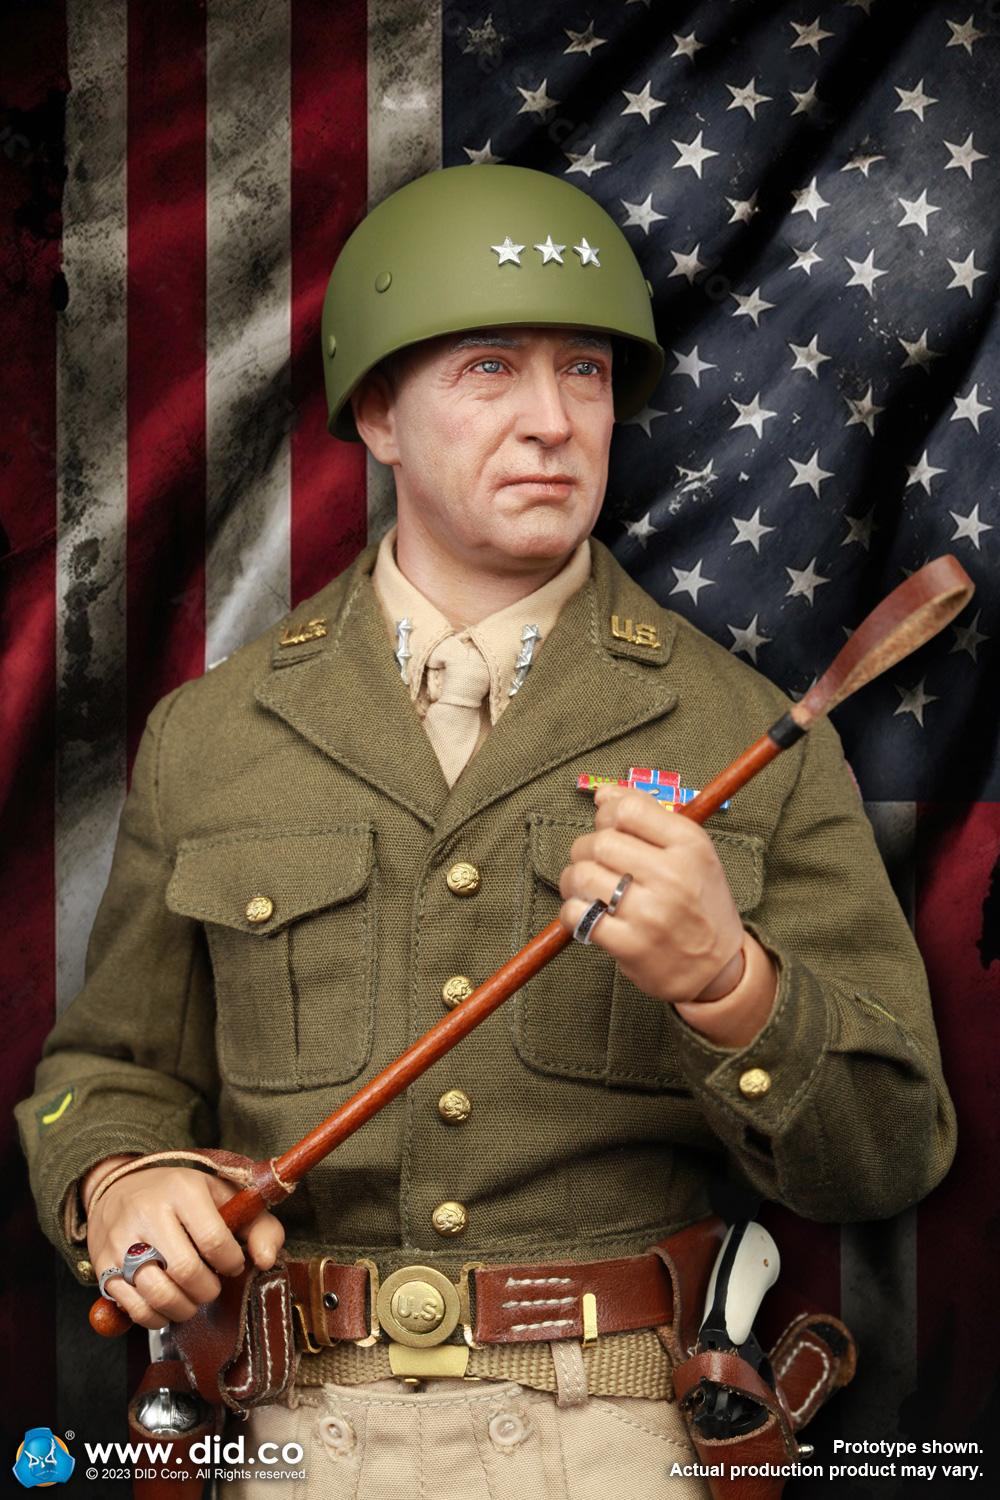 GoergeSmithPattonJr - NEW PRODUCT: DiD: A80164  WWII General Of The United States Army George Smith Patton Jr.   9596